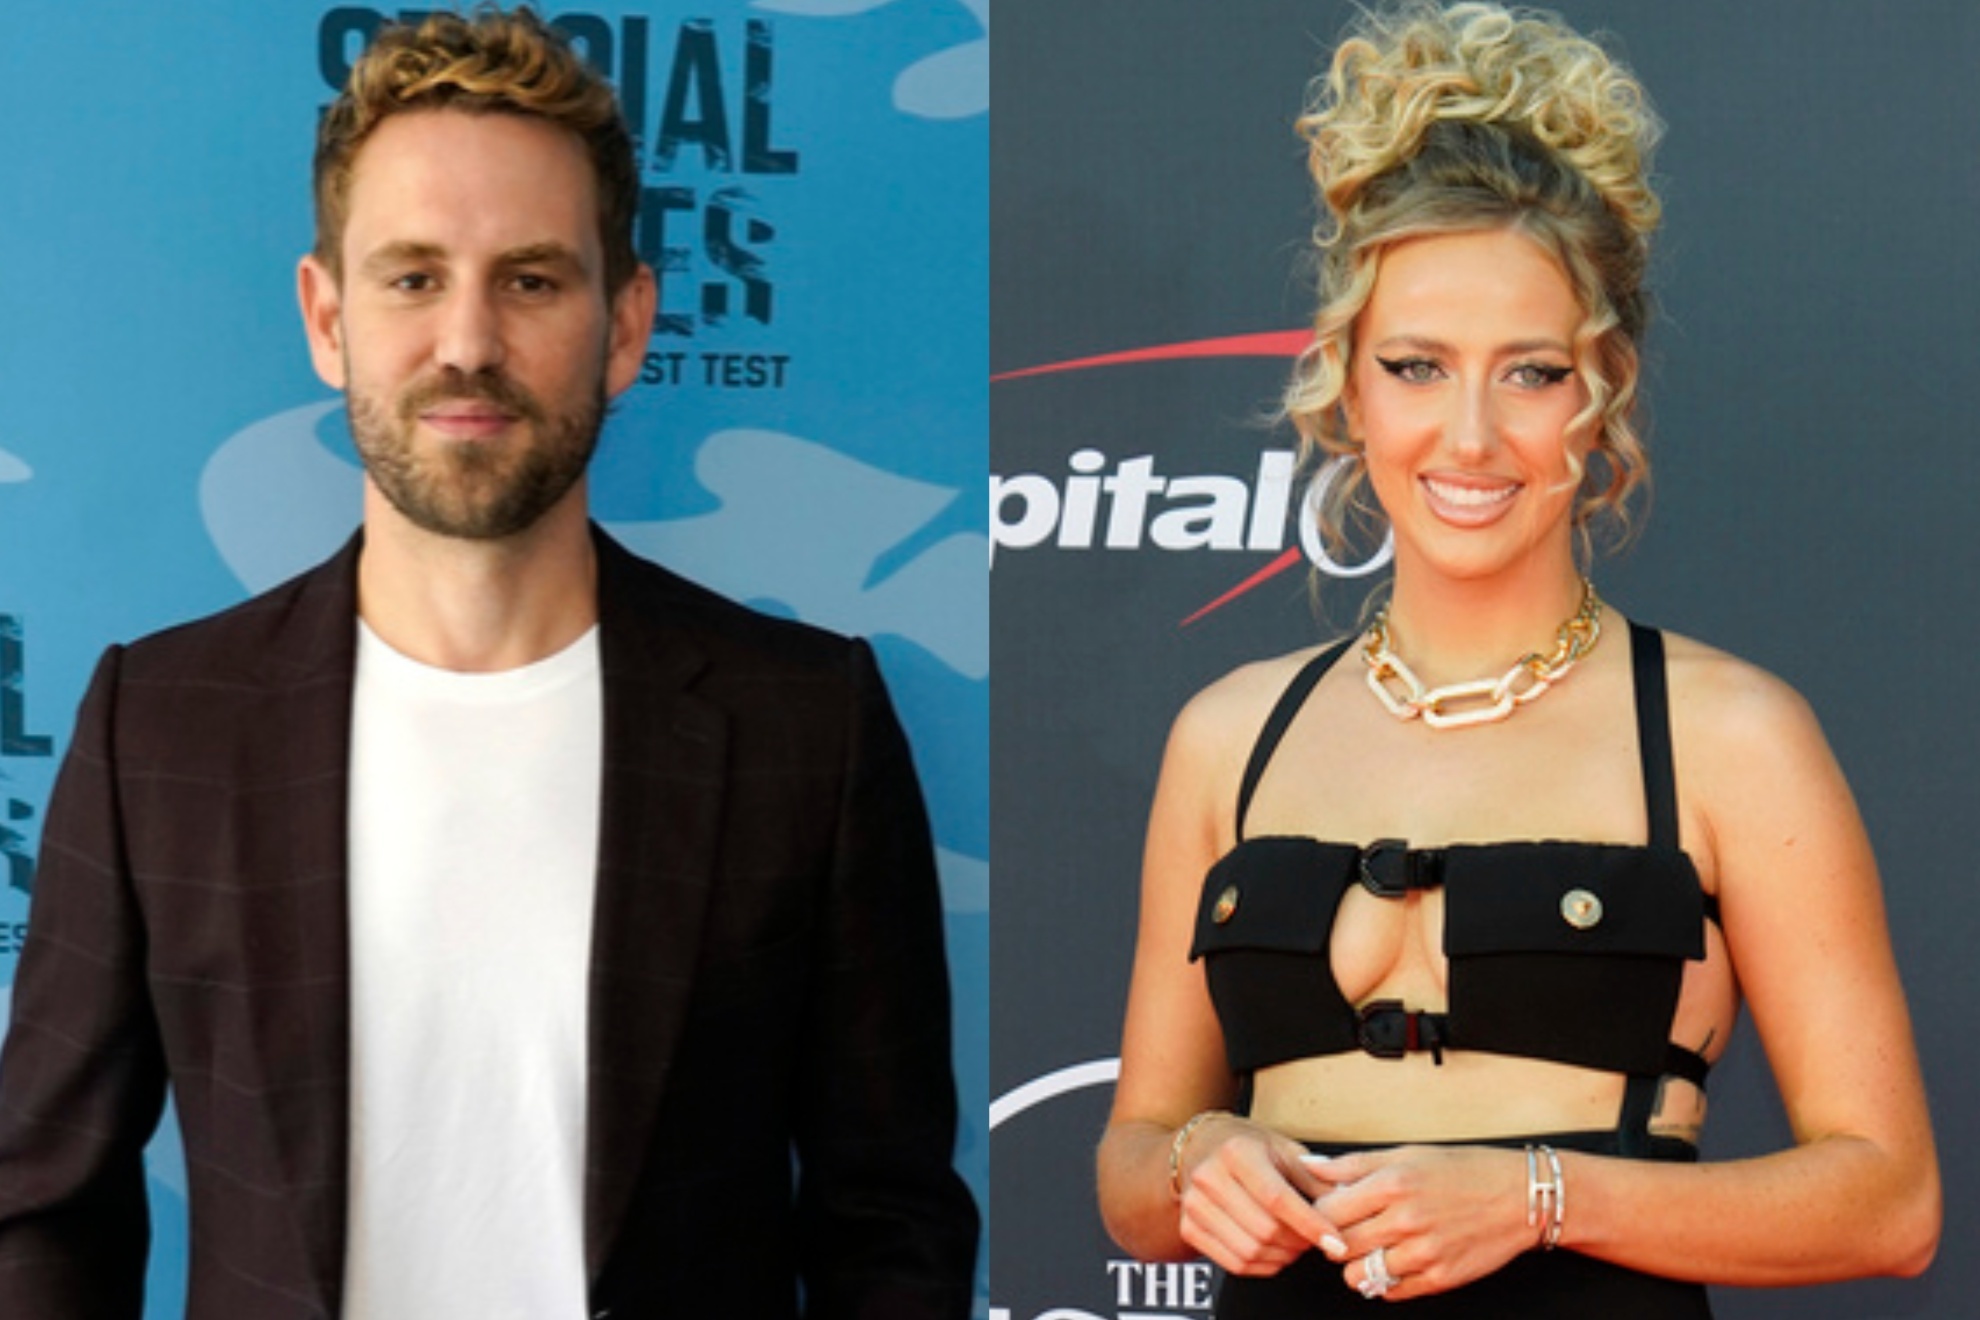 Nick Viall defended Brittany Mahomes after SKIMS ad backlash from Taylor Swift fans